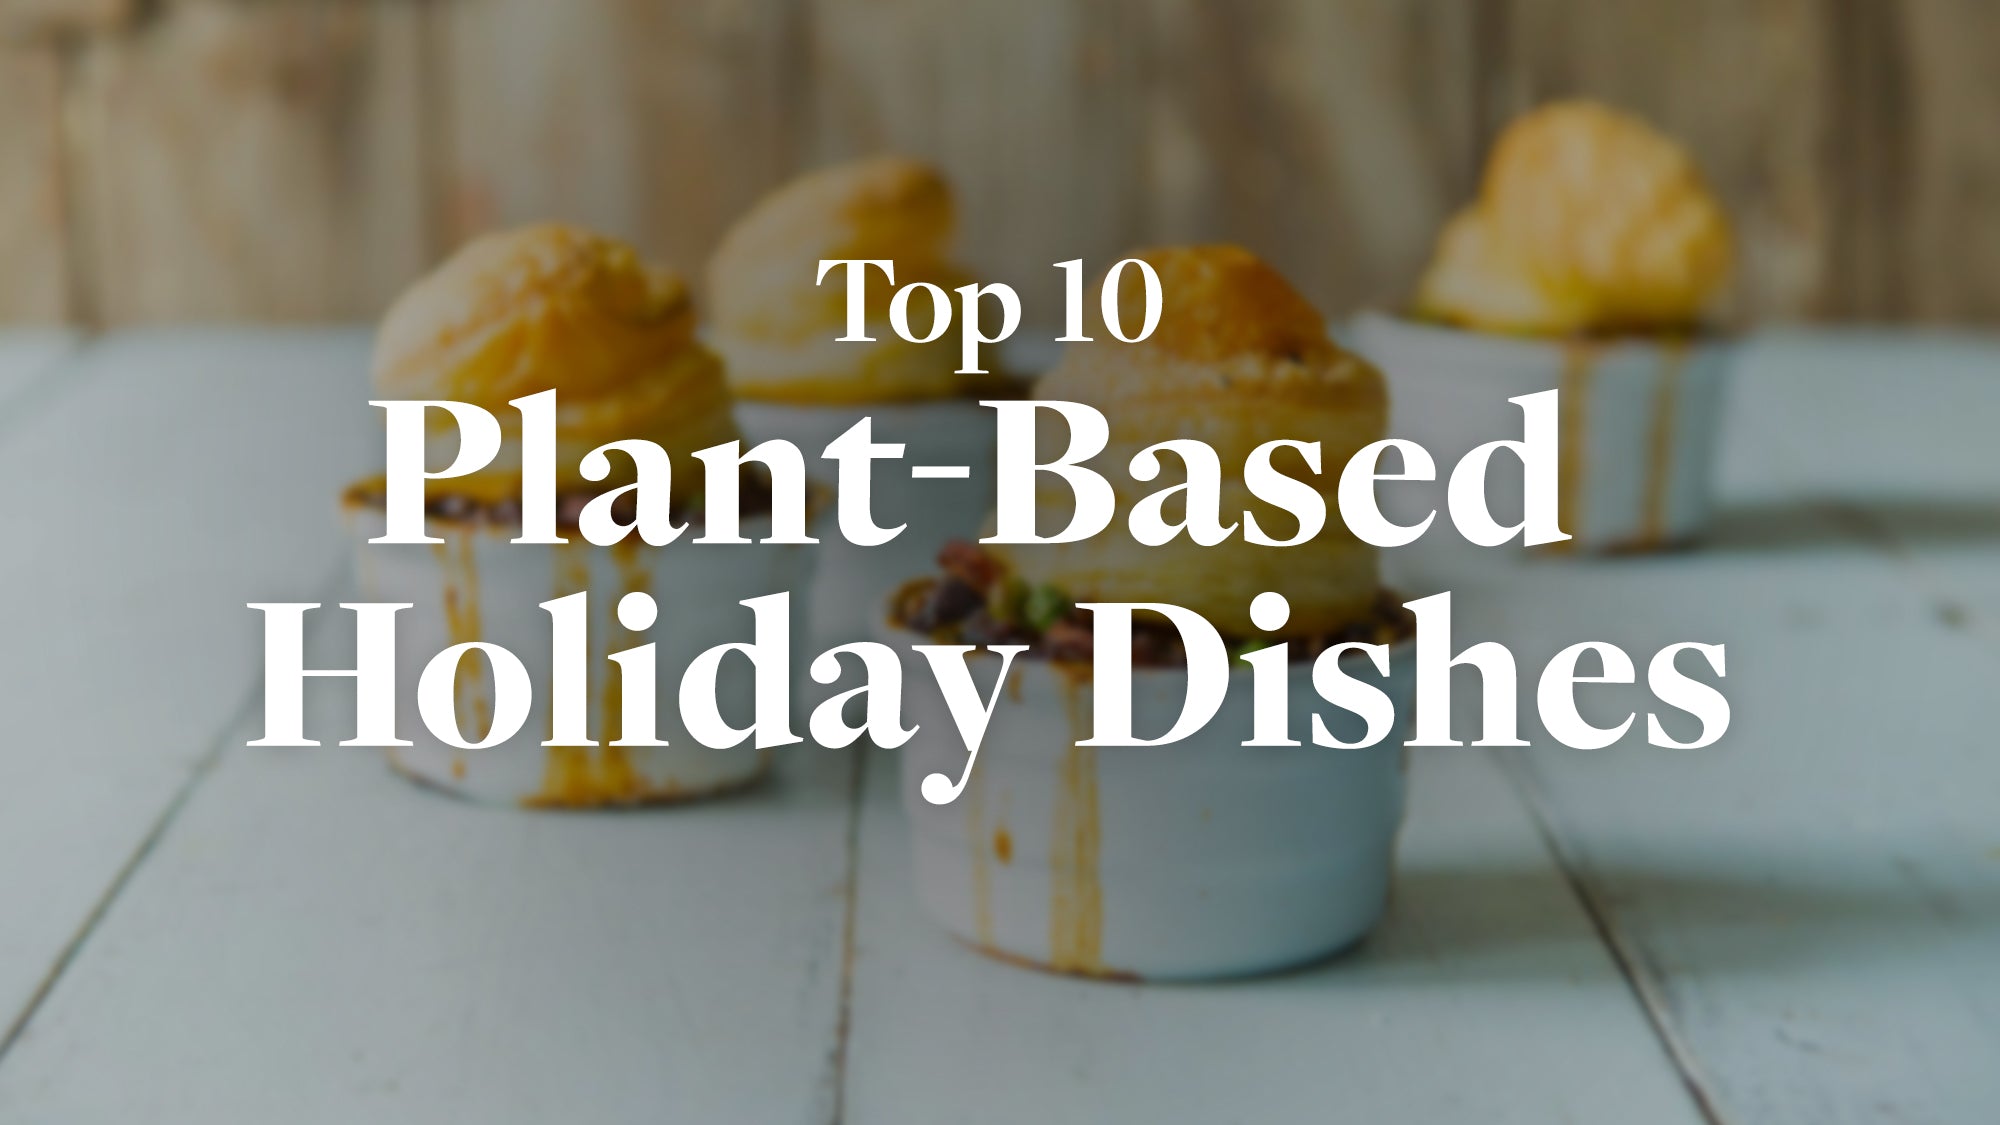 Top 10 Plant-Based Holiday Main Dishes